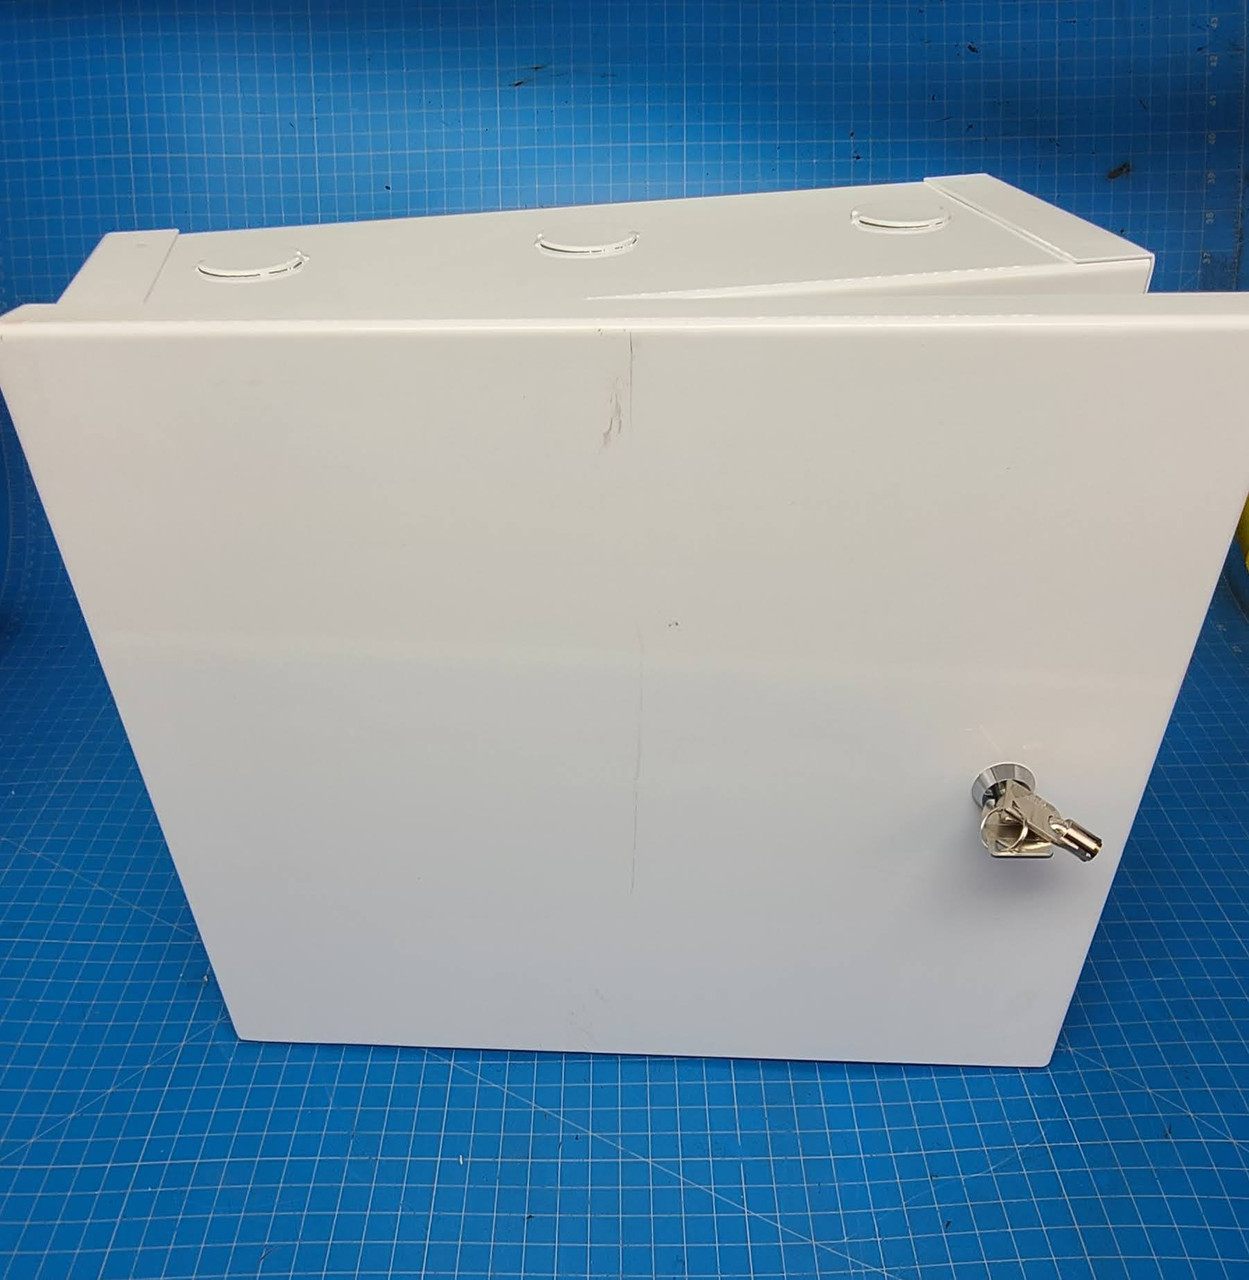 Multi-Purpose Industrial Lockable Cabinet 32 x 25 x 8 White Steel Surface Mounted (3) 1.25" KO Top CAB127